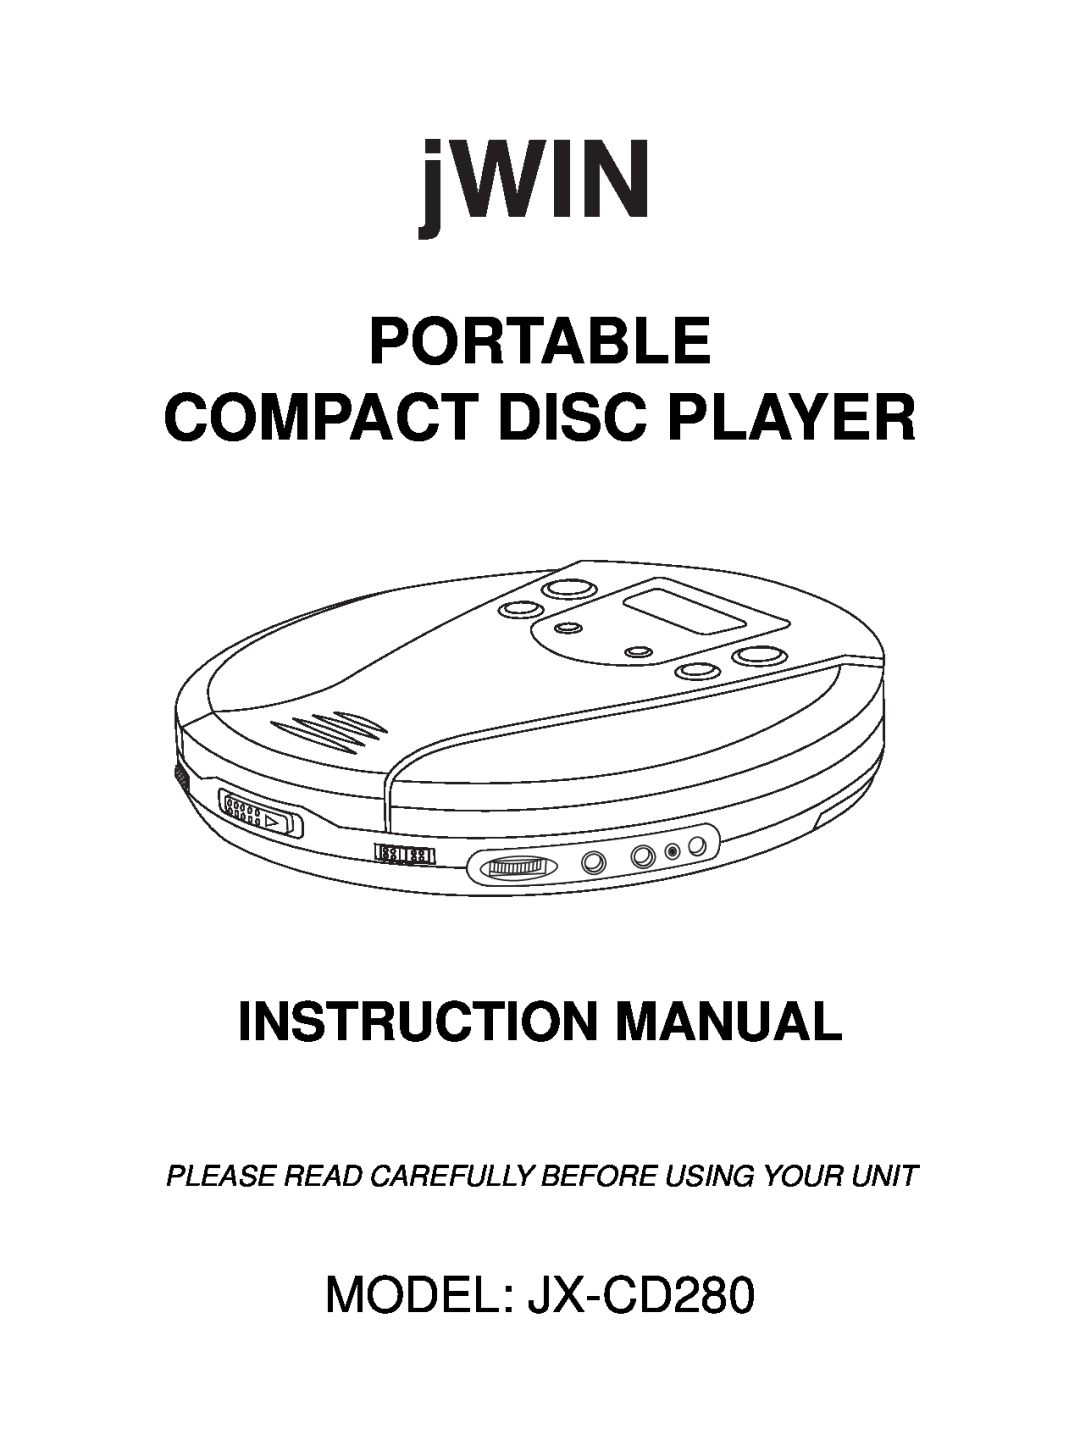 Jwin instruction manual Portable Compact Disc Player, MODEL: JX-CD280, Please Read Carefully Before Using Your Unit 